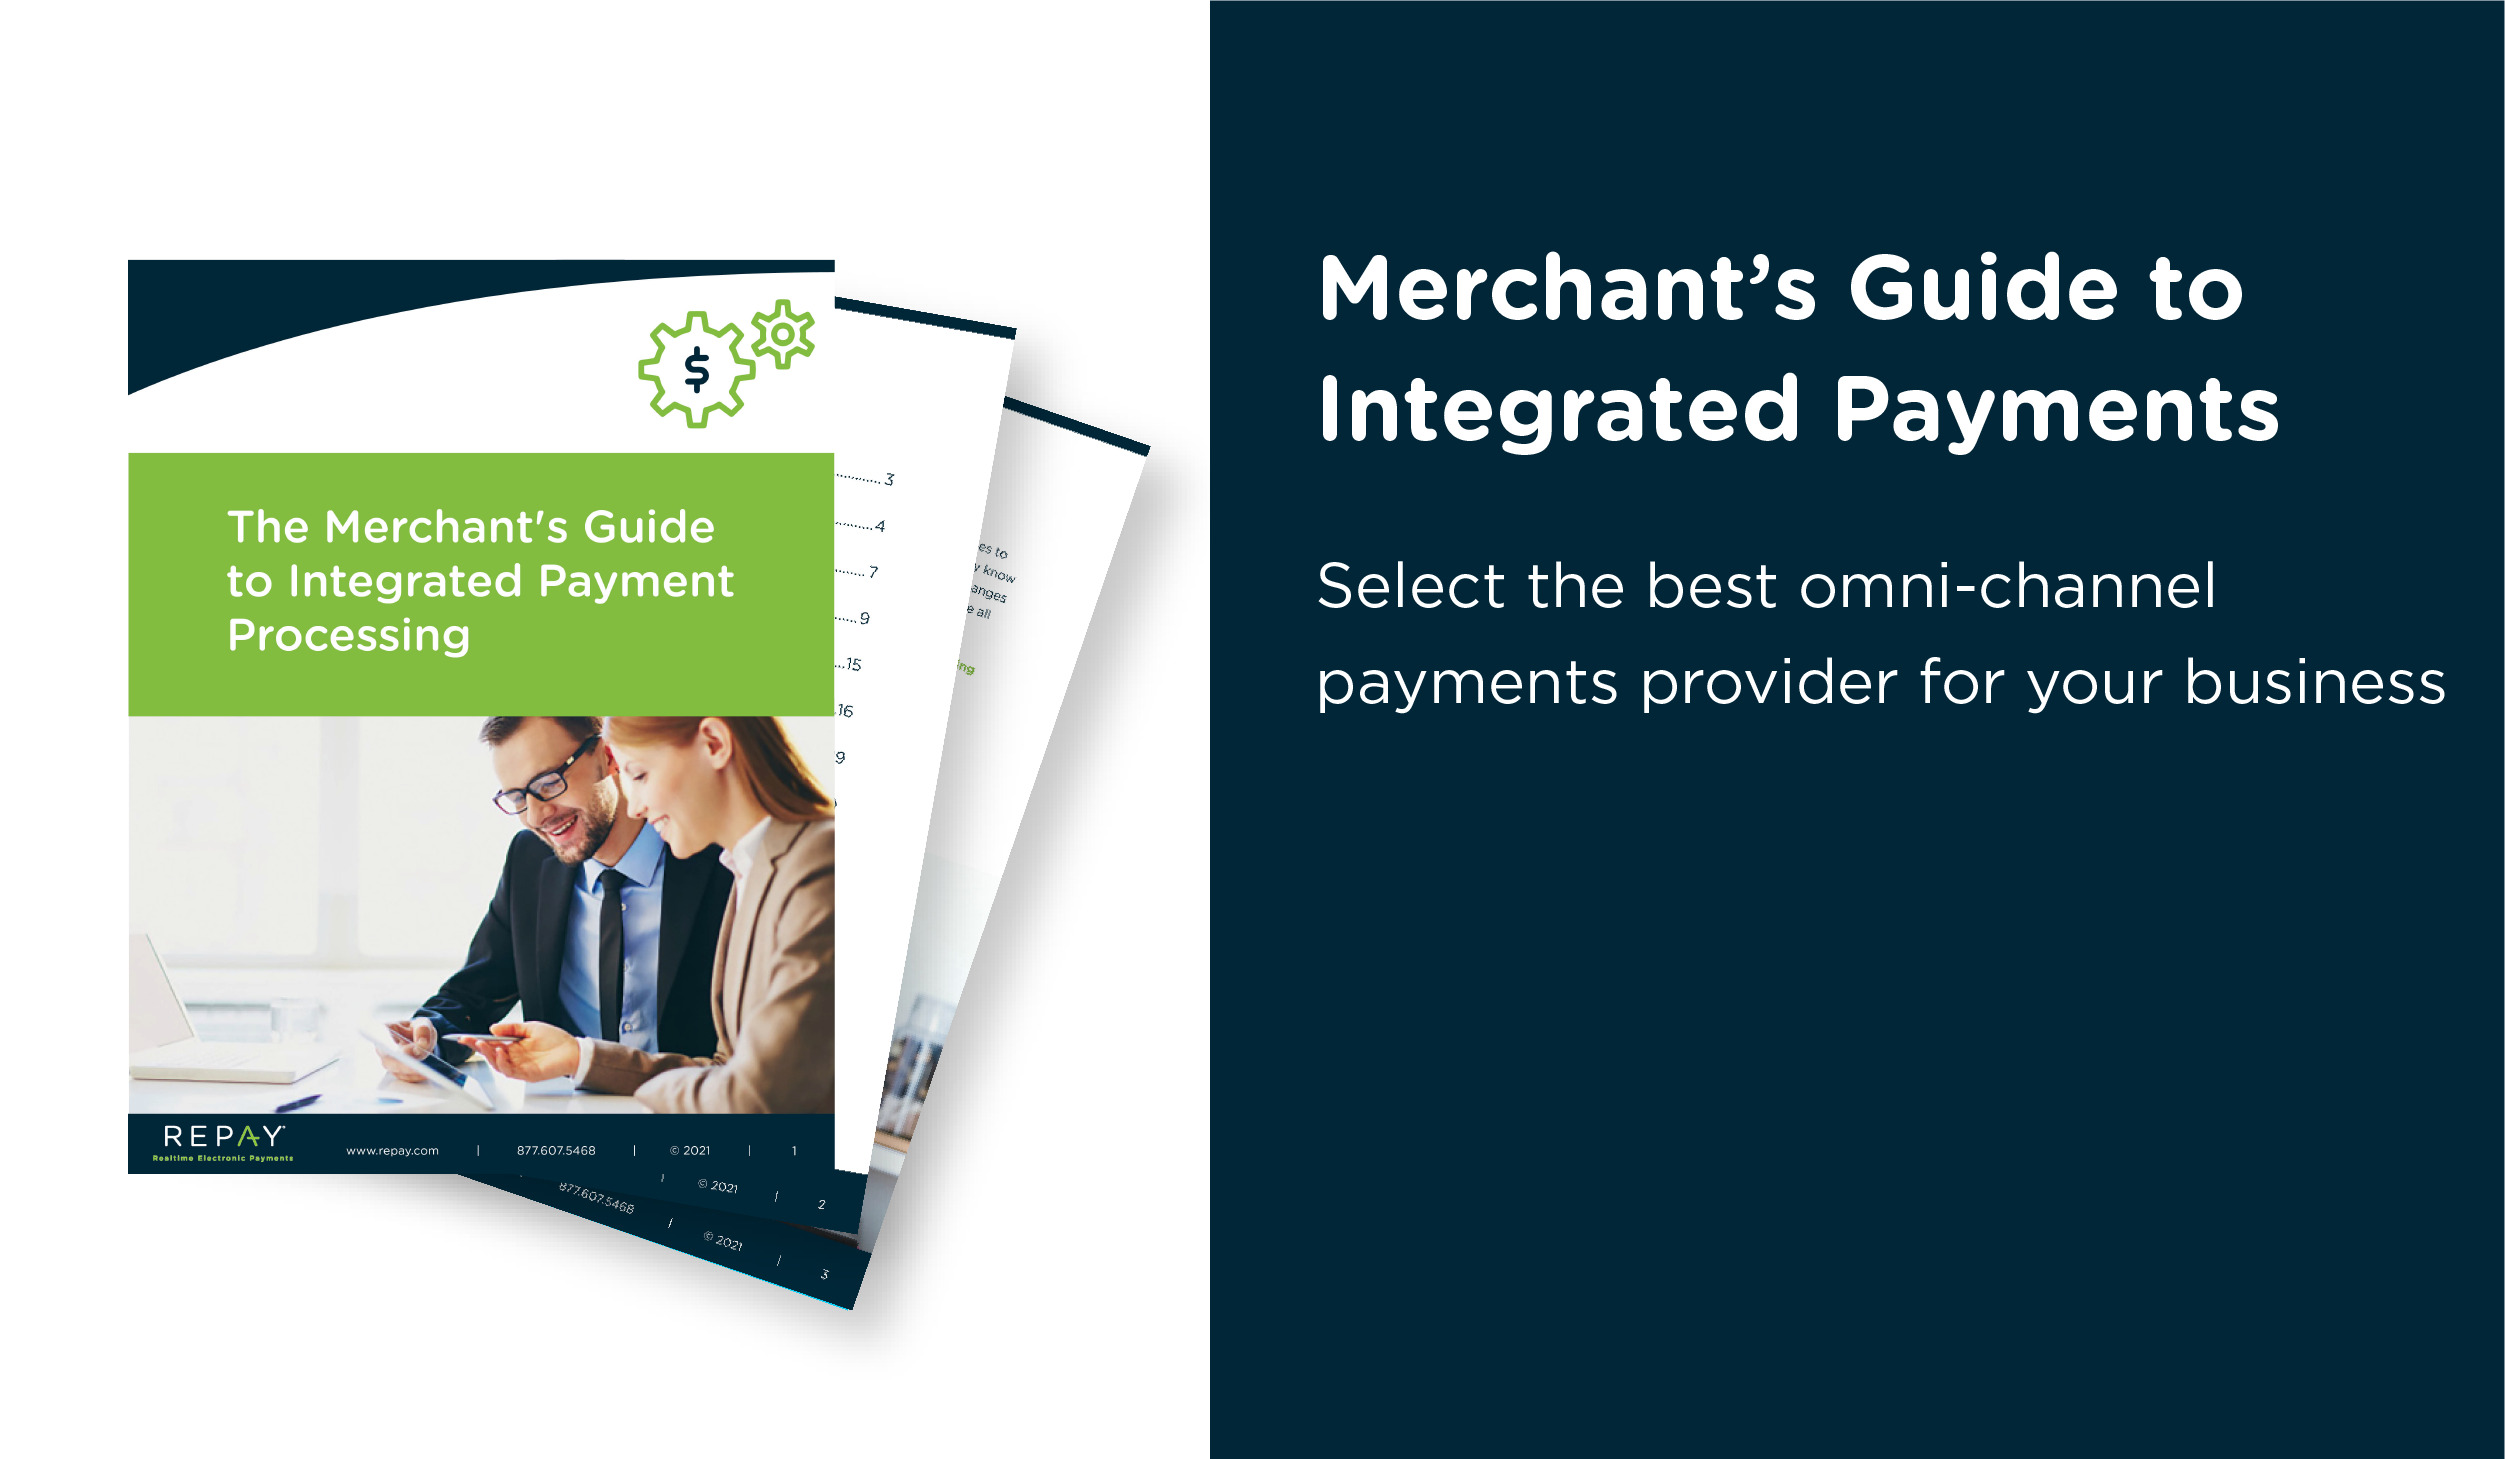 Buyer's Guide for Merchants Explains Omni-Channel Integrated Payments